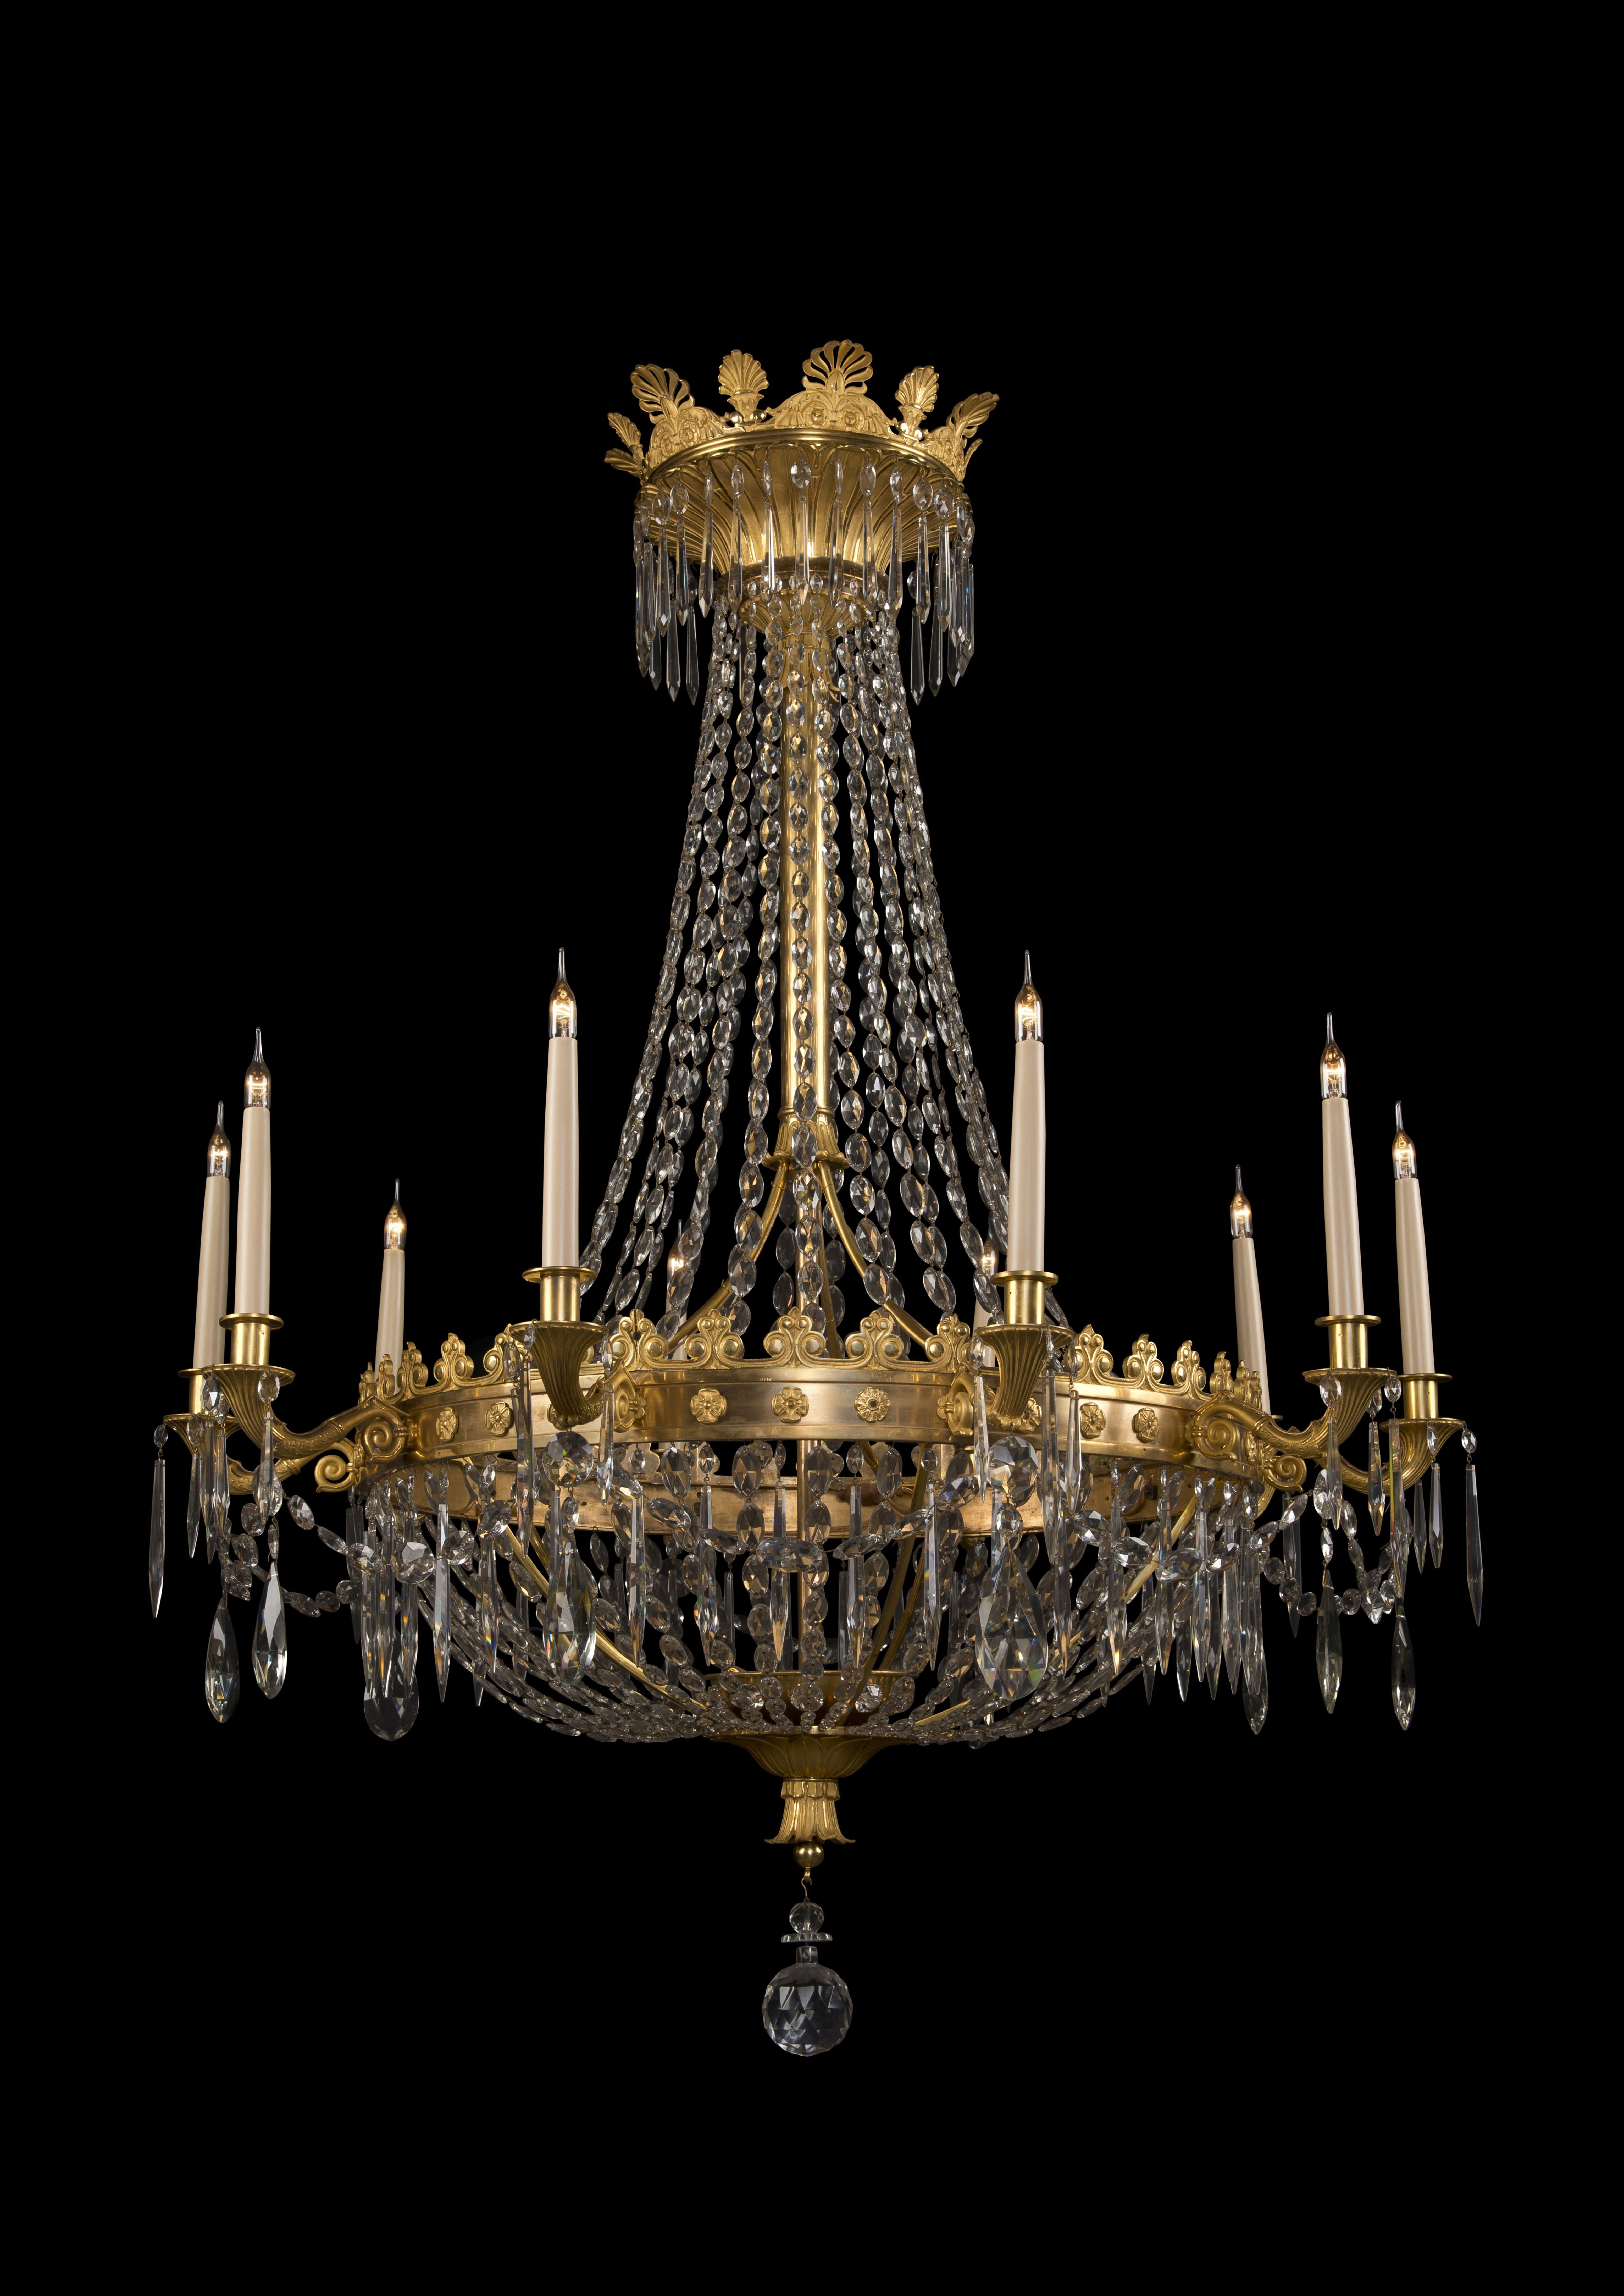 A fine Louis XVI style gilt-bronze and cut-glass ten-light tent and bag chandelier.

French, circa 1900. 

This impressive chandelier has a gilt-bronze crown cast with anthemions suspending chains of cut-glass beads to a gilt-bronze gallery cast